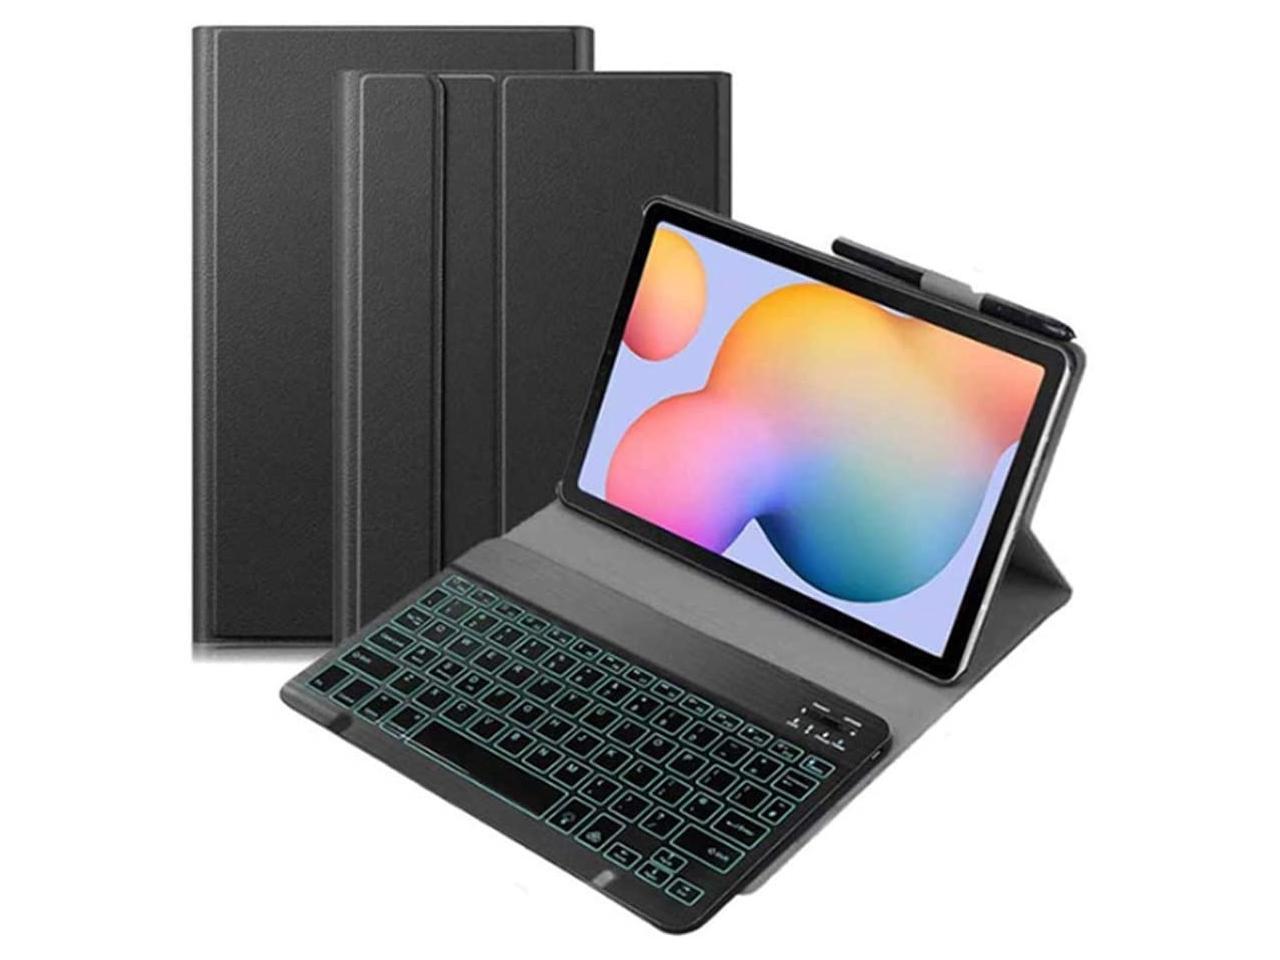 for Samsung Galaxy Tab S7 Plus 12.4 inch 2020 Keyboard Leather Case 7 Color Backlit Slim PU Case